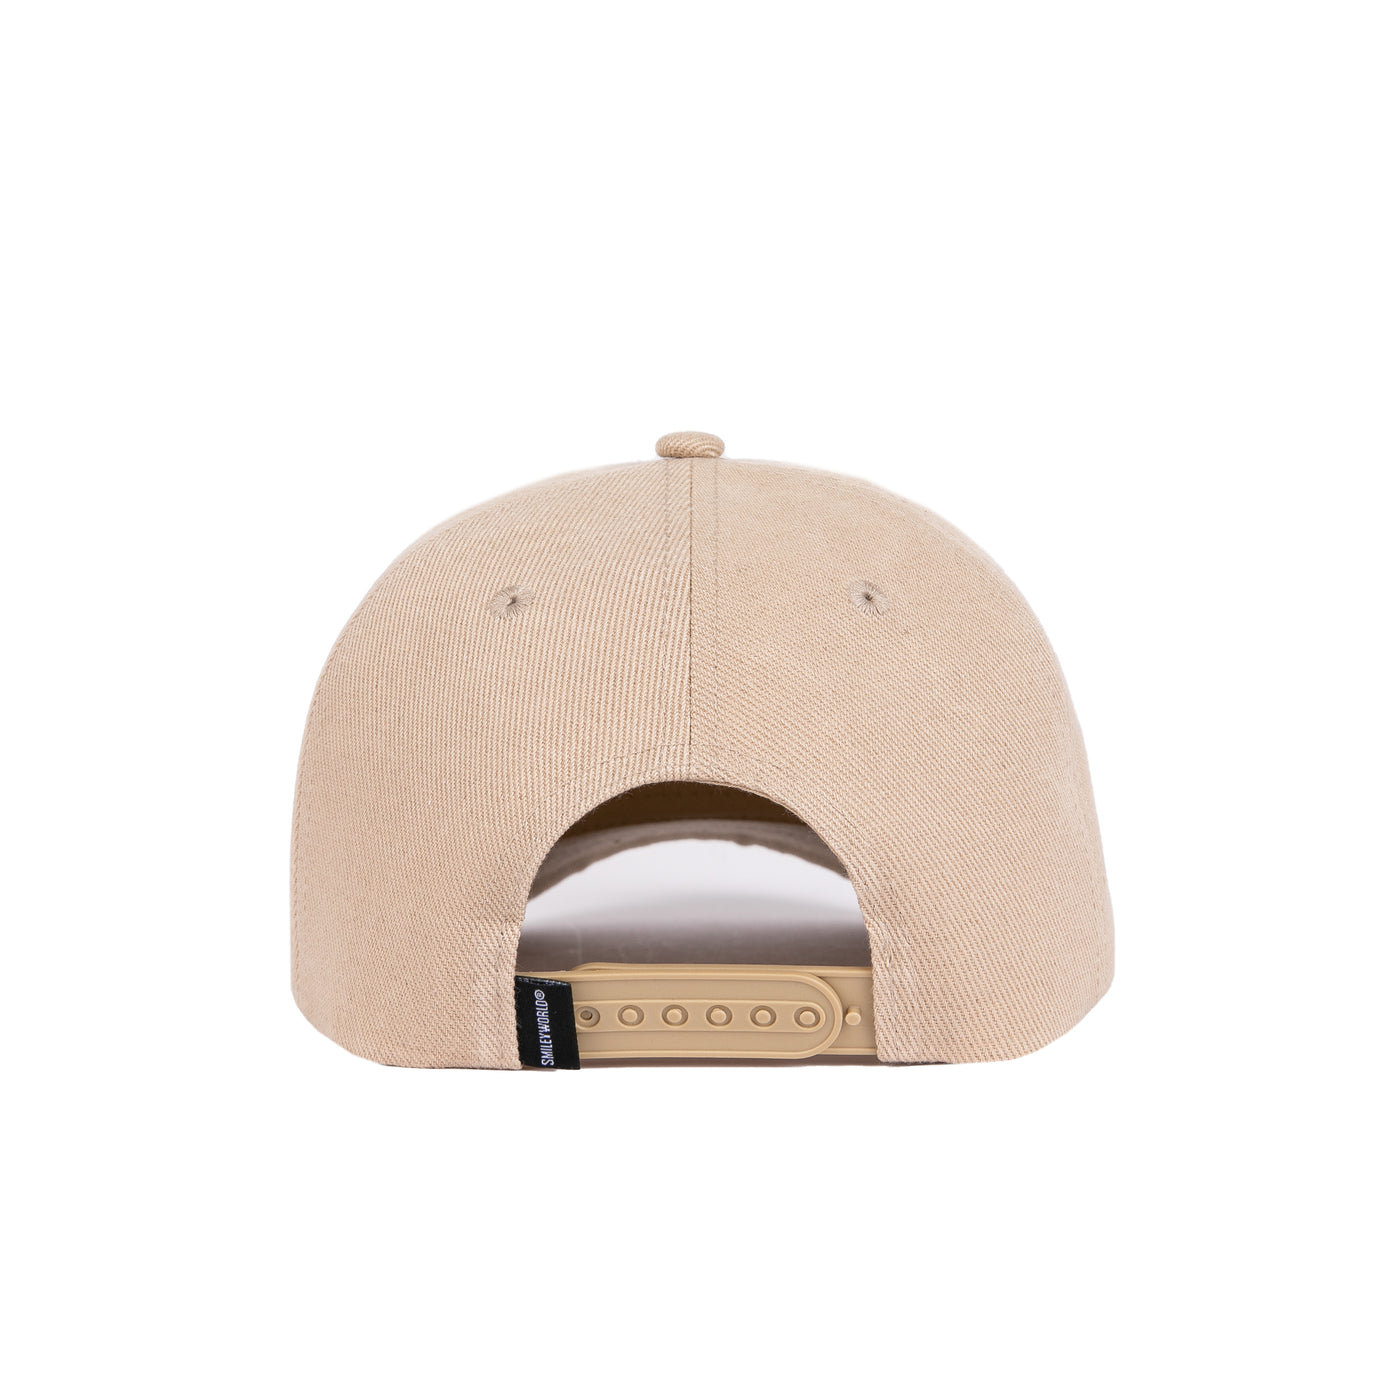 SMILEYWORLD Grizzly x Smiley World Dad Hat - Tan